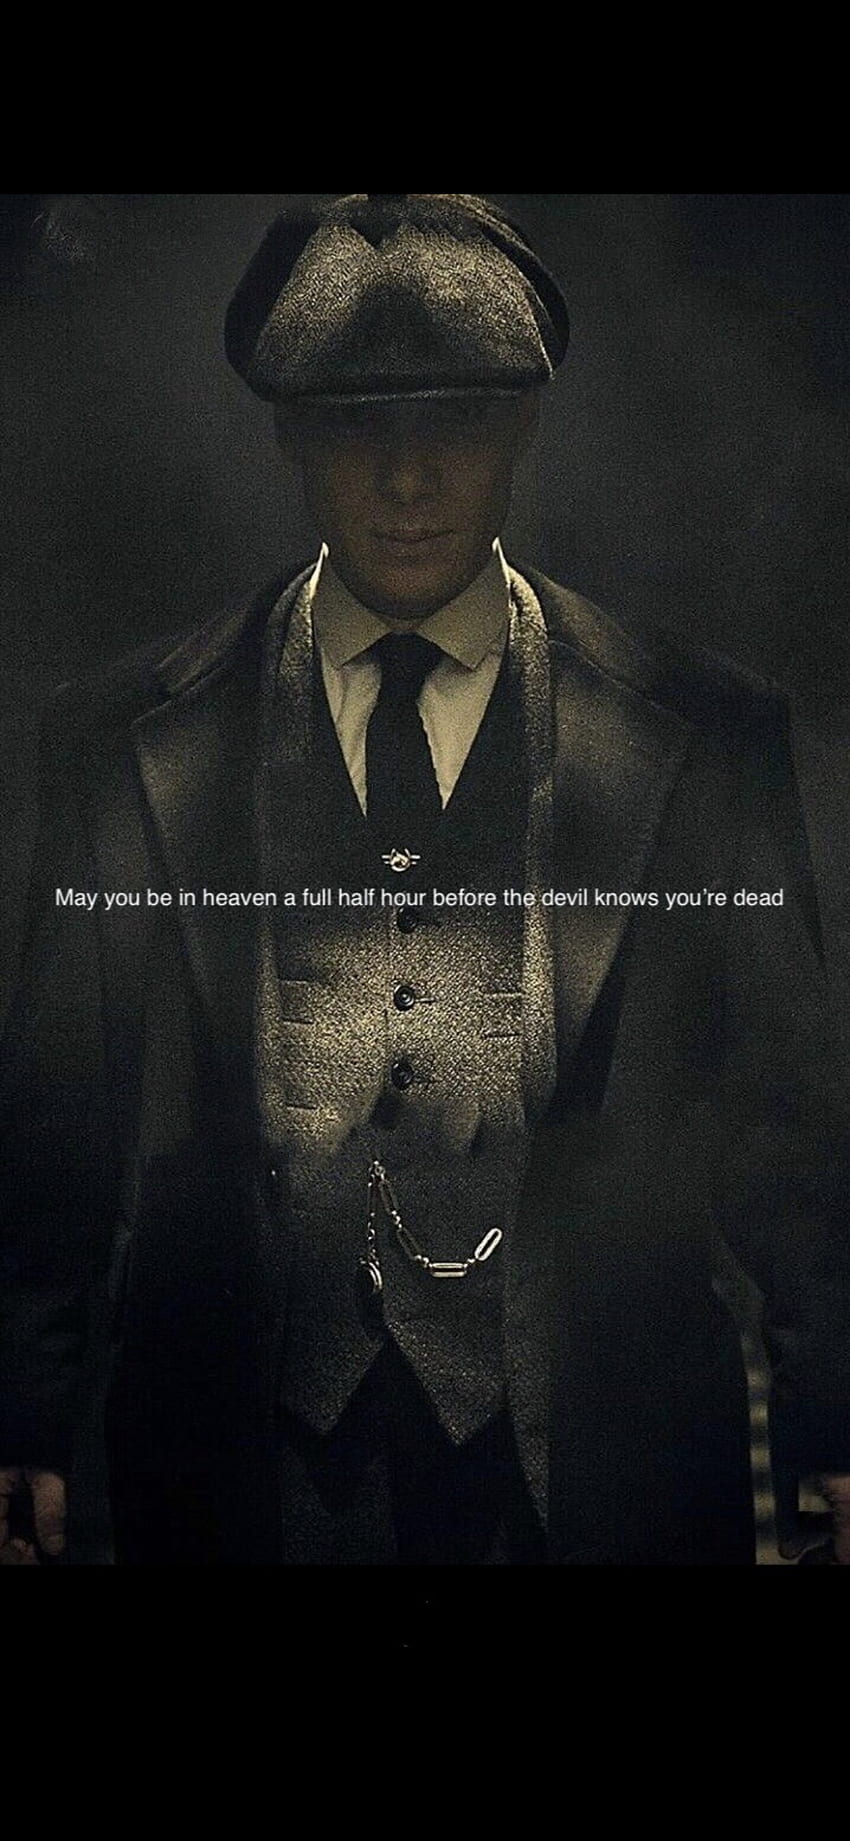 Pin by i 🗽 on SOUL&DREAM.  Peaky blinders poster, Peaky blinders thomas,  Peaky blinders wallpaper